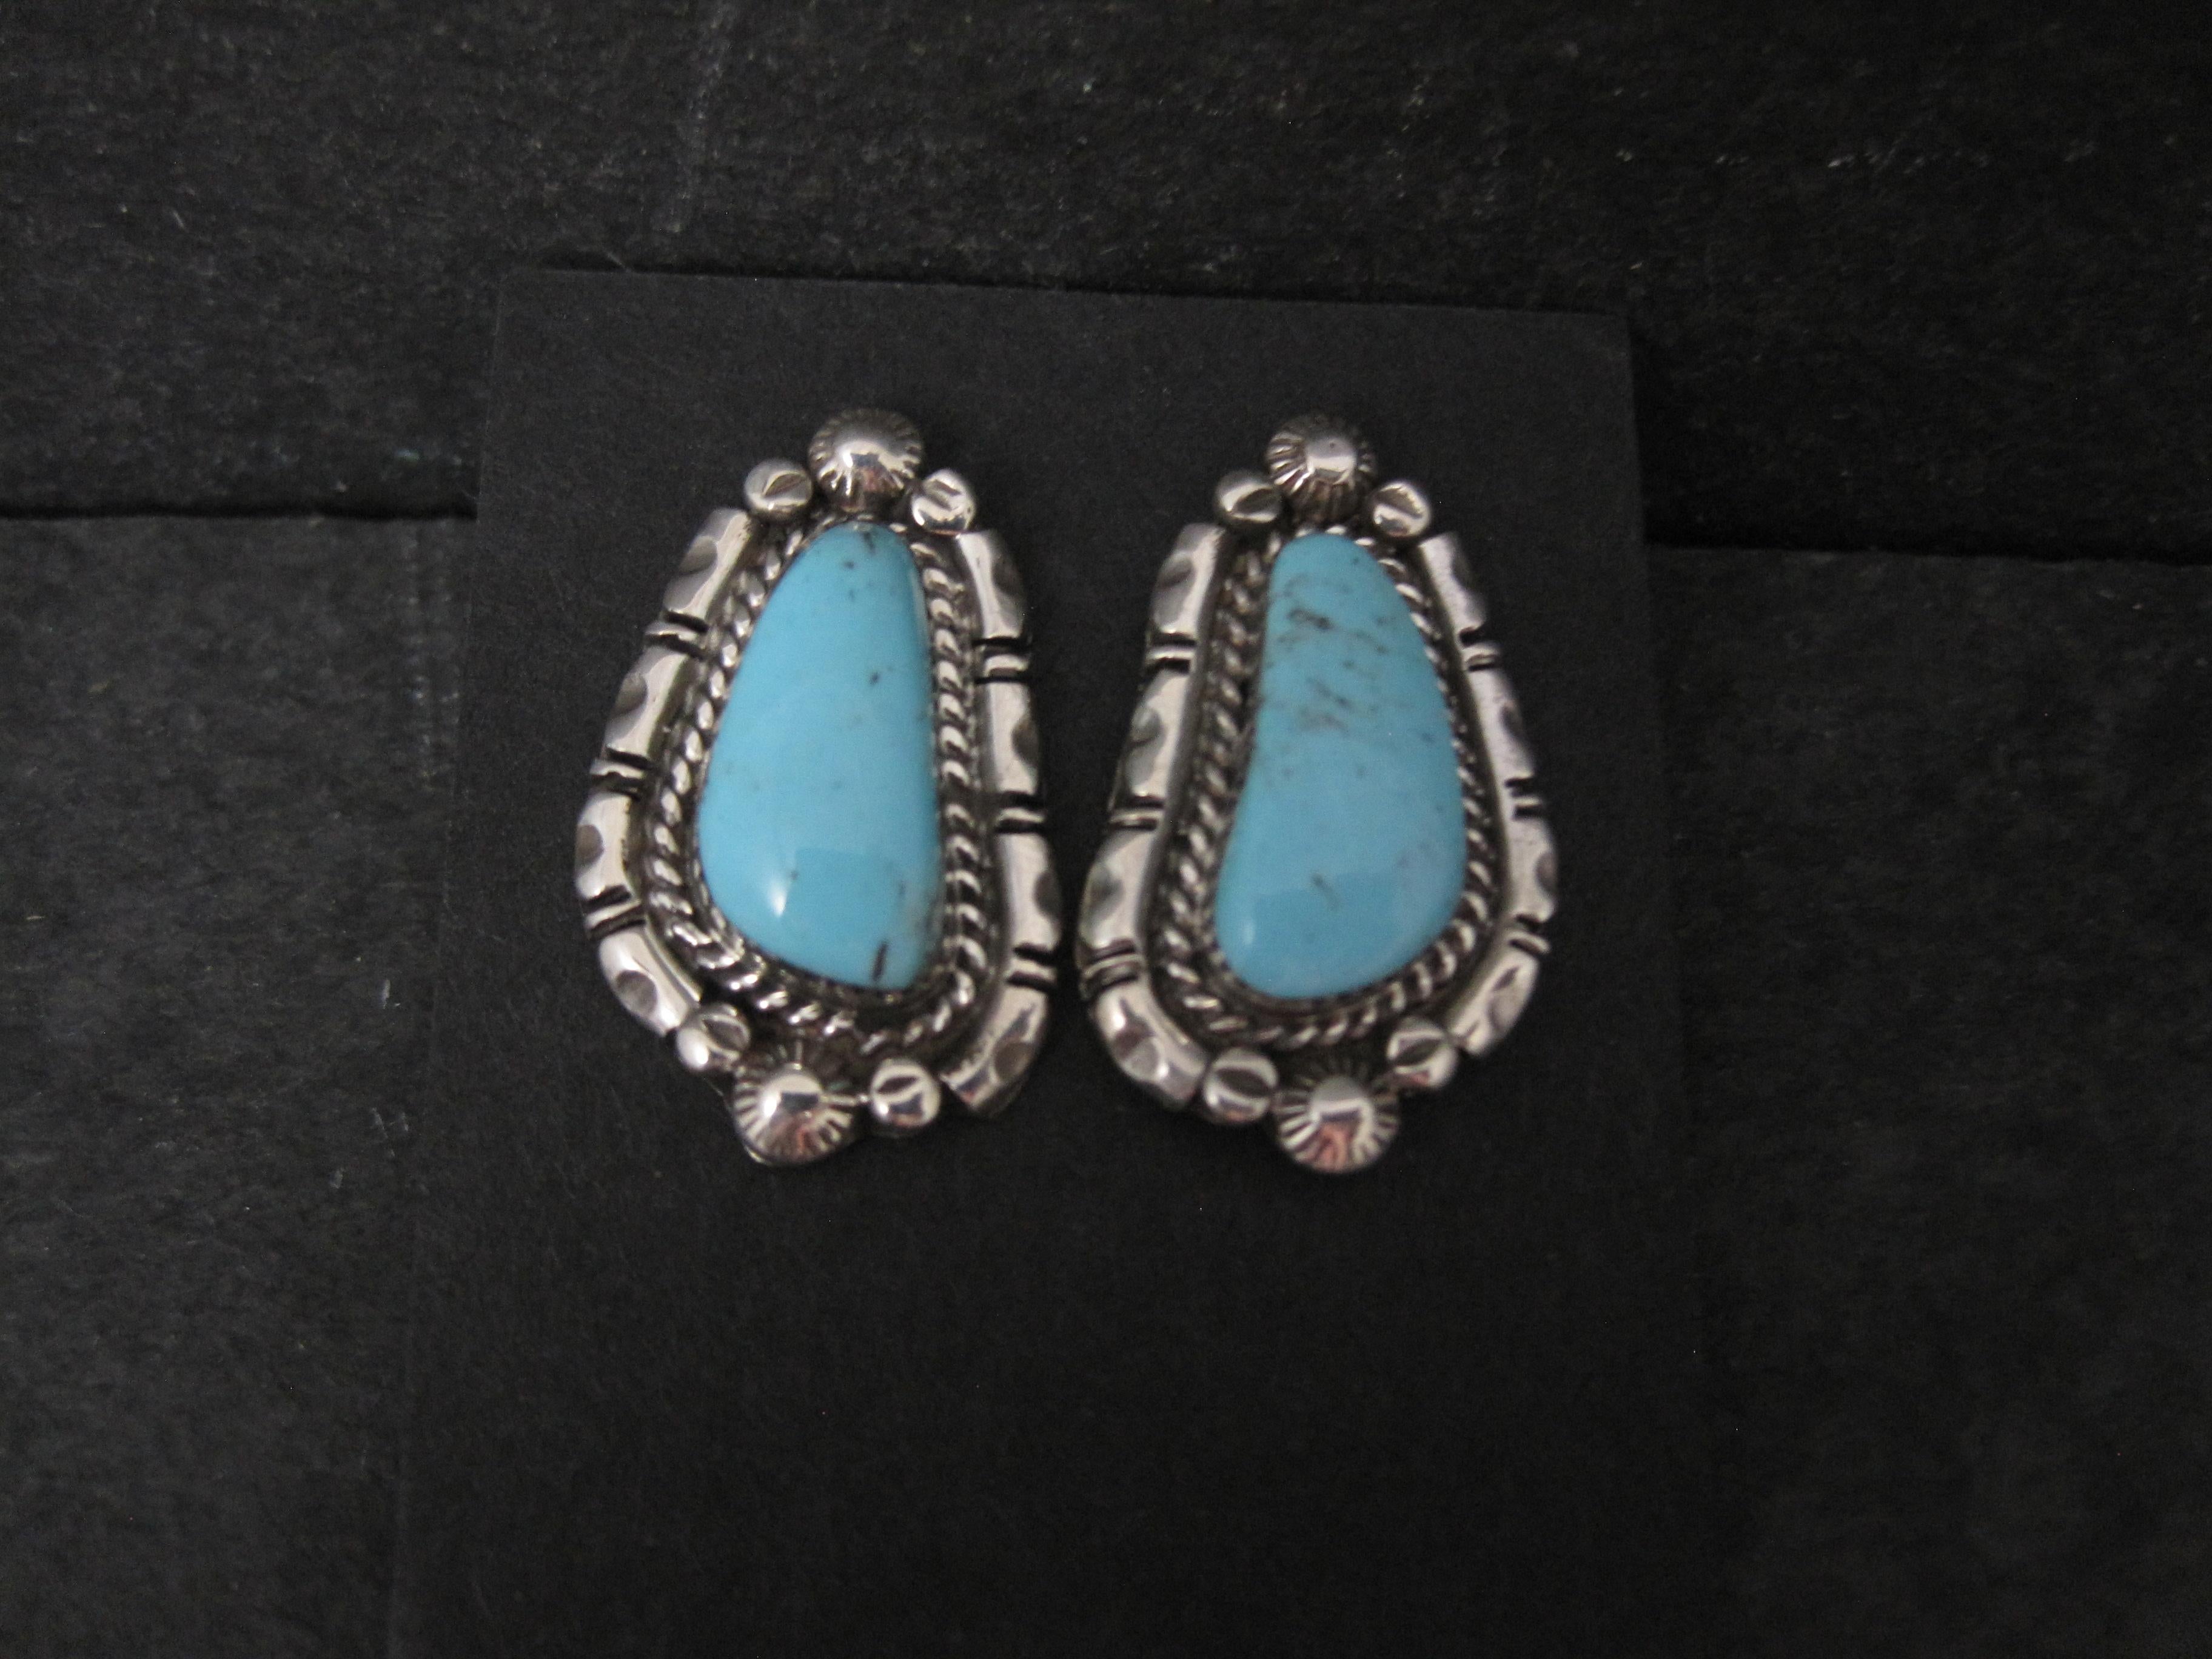 These gorgeous earrings are sterling silver with genuine turquoise gemstones.
They are the creation of Navajo silversmith Anne Spencer for Running Bear Shop.

Measurements: 5/8 by 1 inch
Weight: 8.6 grams

Condition: New